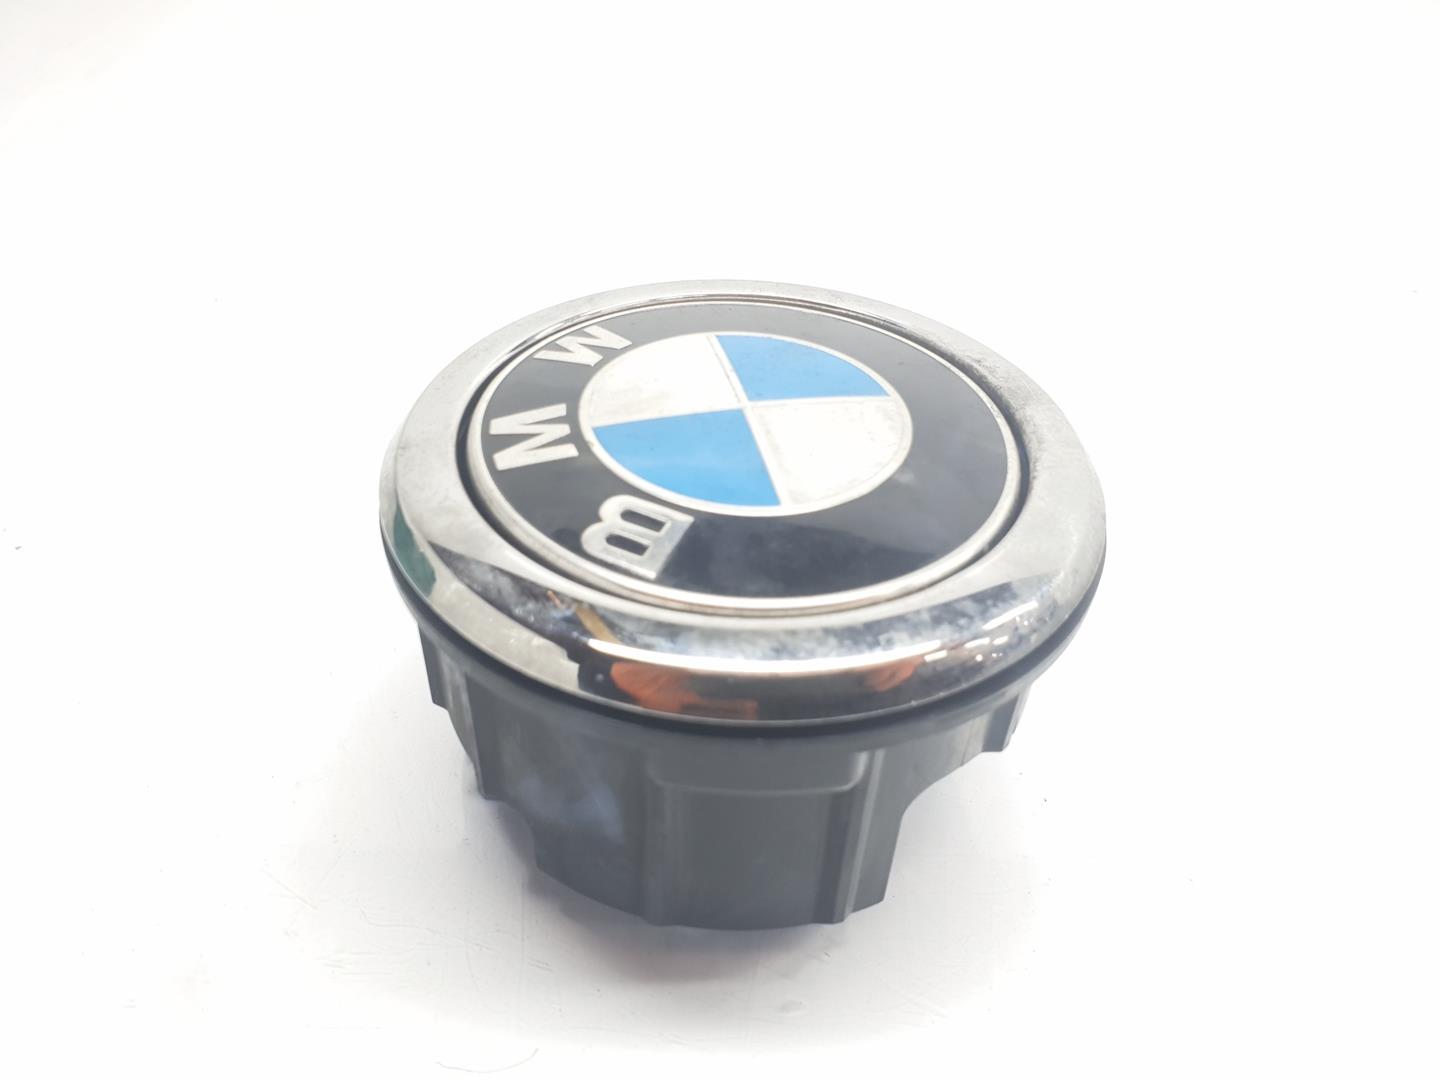 BMW 1 Series F20/F21 (2011-2020) Other Body Parts 51247248535, 51247248535 24237847